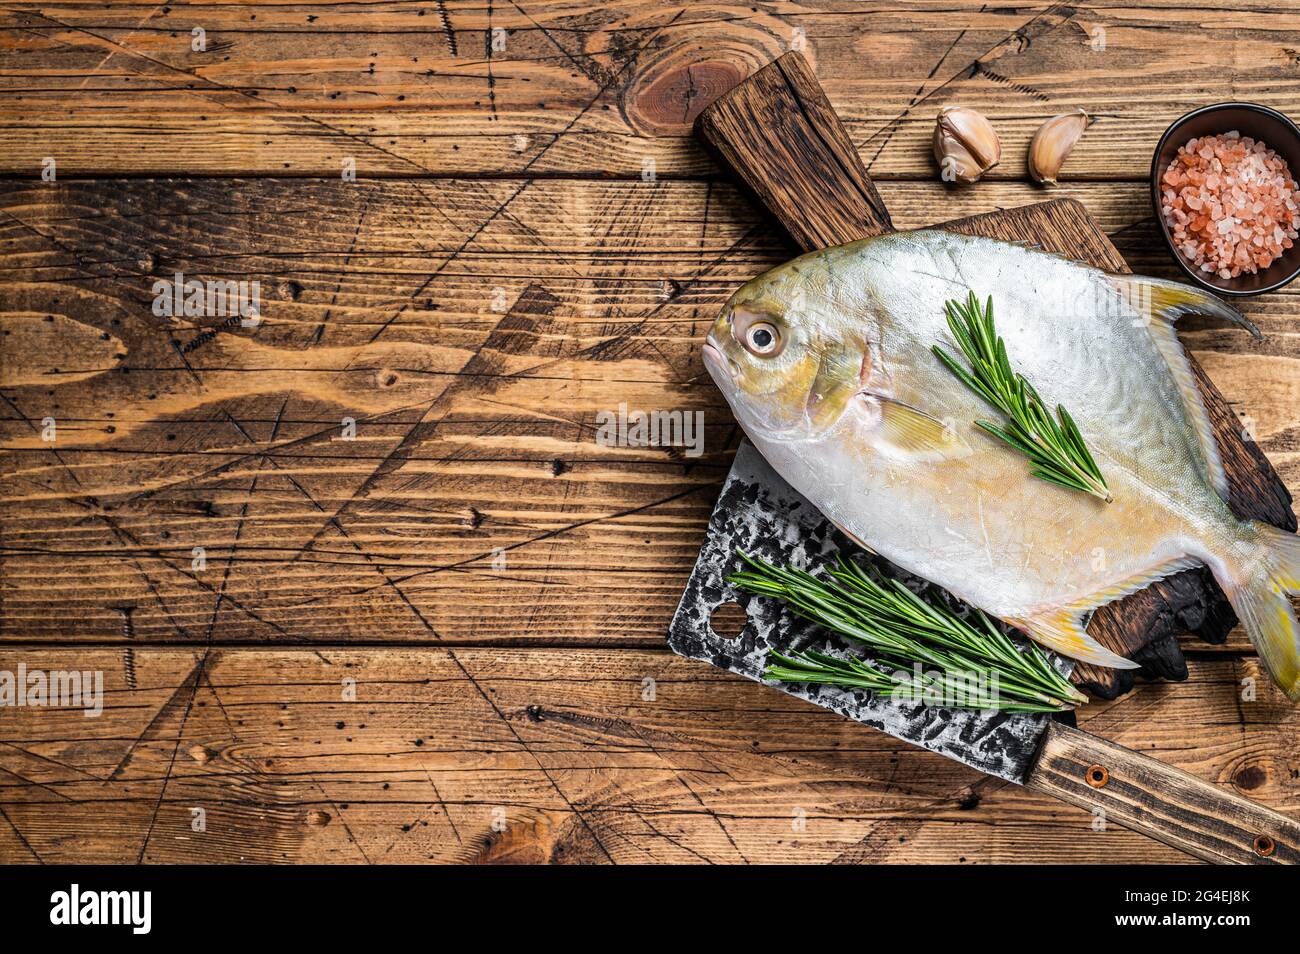 Raw fish Sunfish or pompano on a wooden board. wooden background. Top view. Copy space Stock Photo